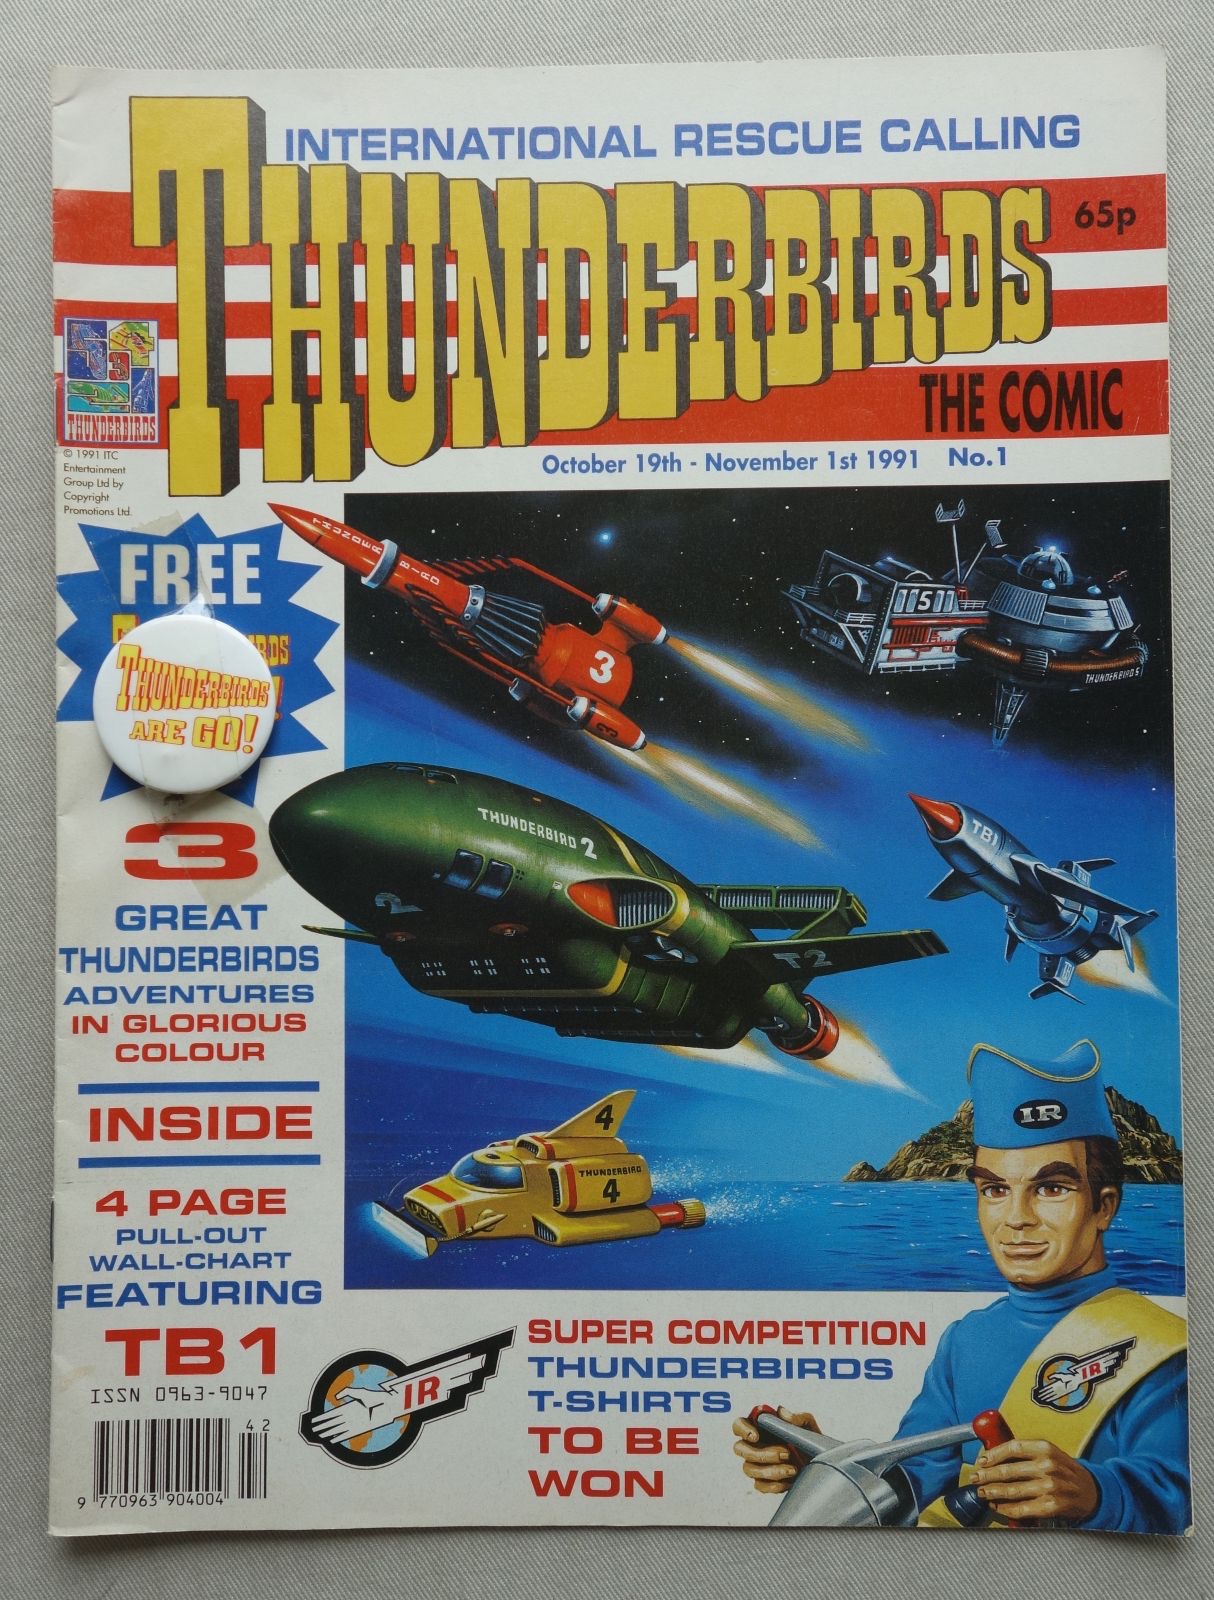 Thunderbirds Issue One - cover dated October/November 1991